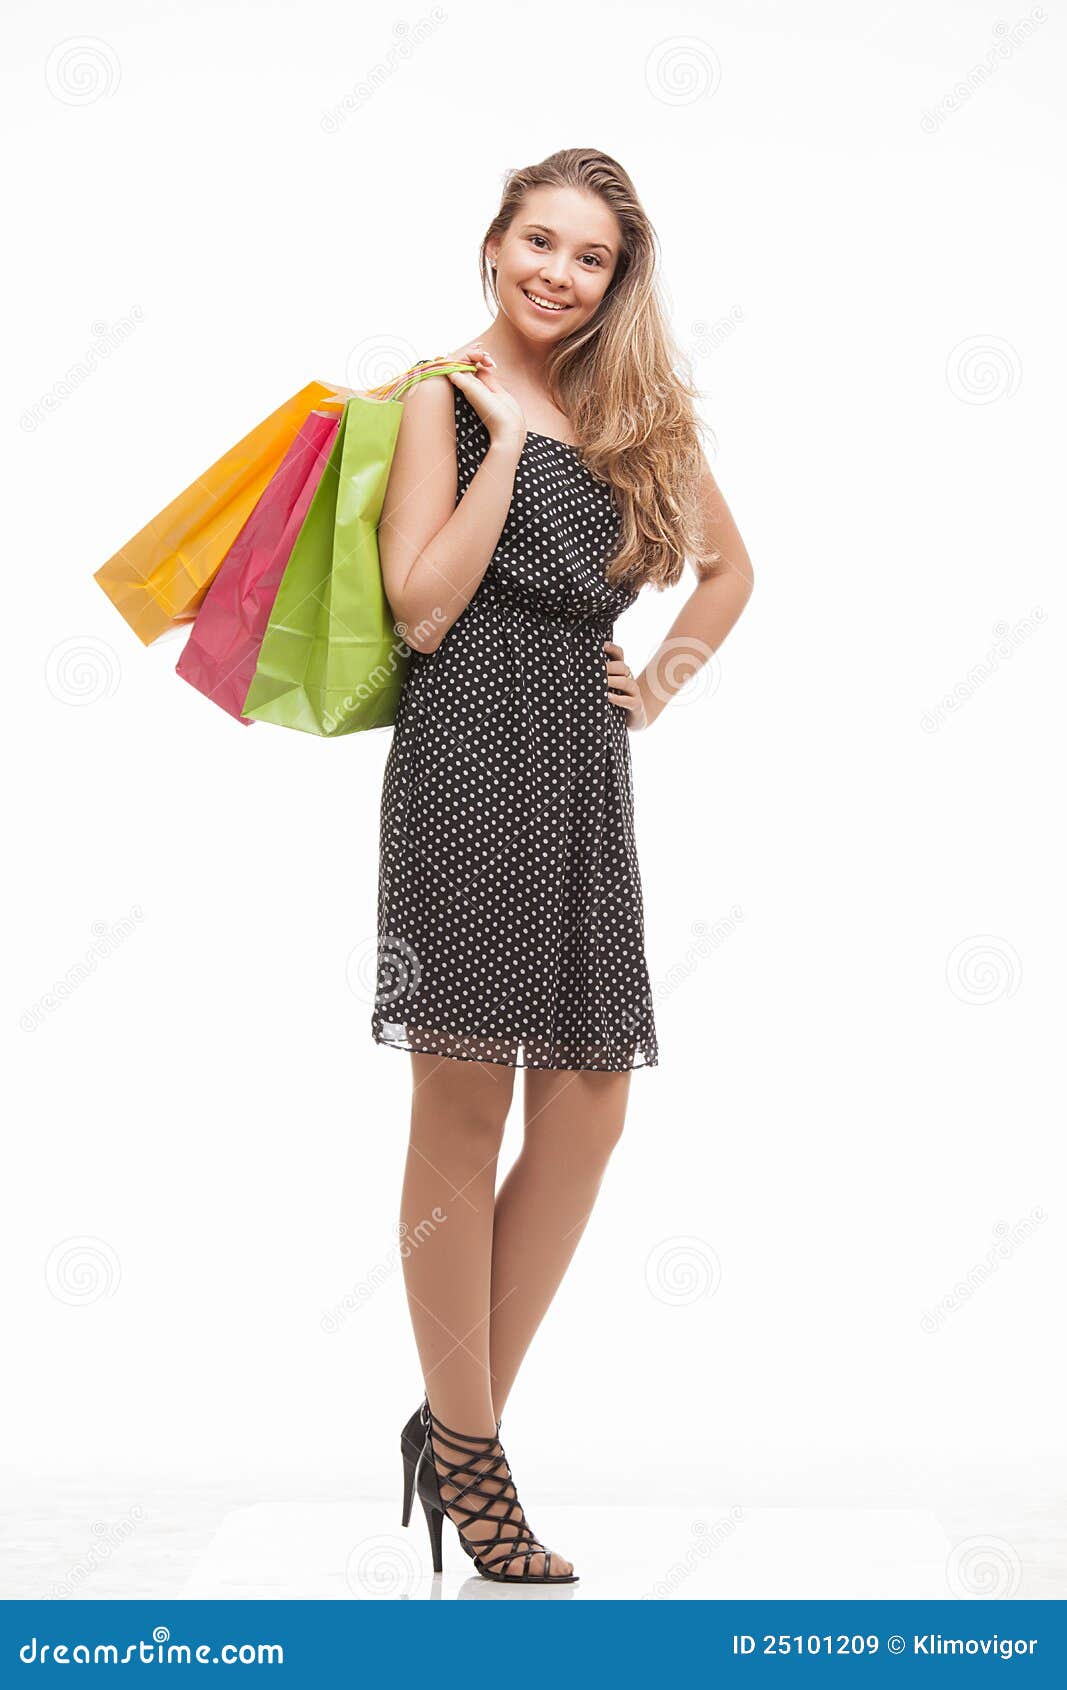 Picture Of Teenage Girl With Shopping Bags Royalty Free Stock Images - Image: 25101209